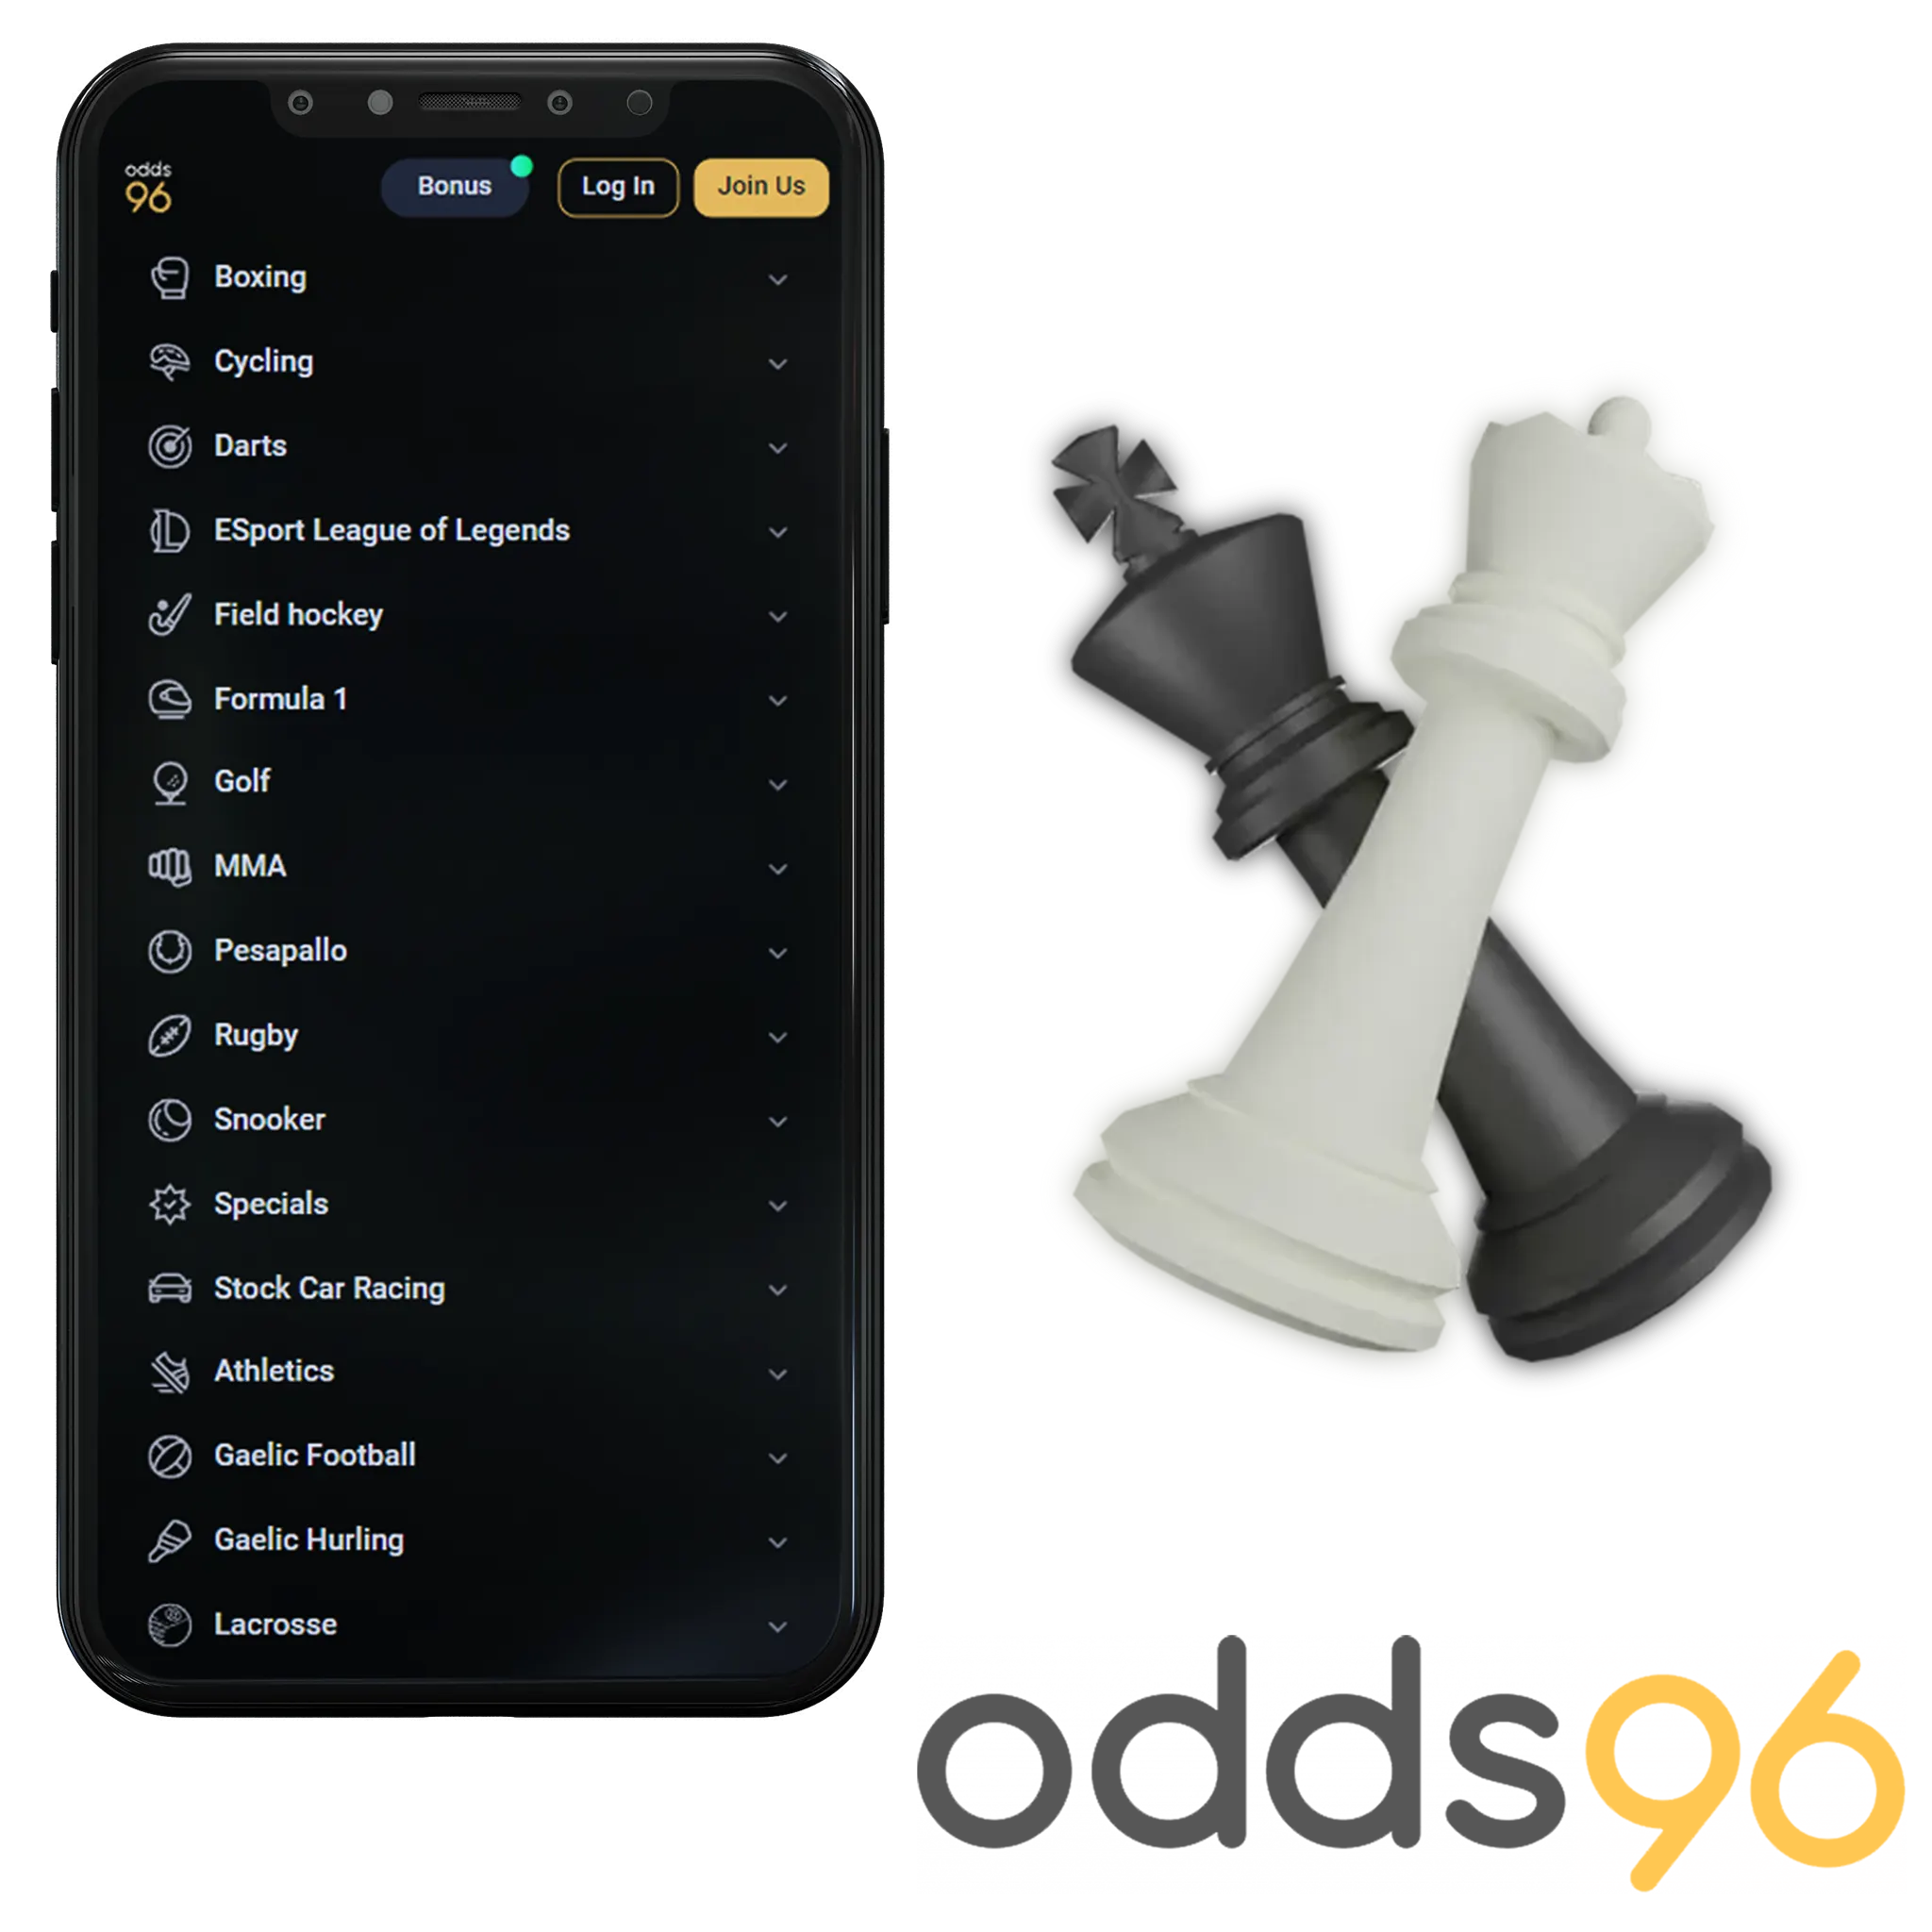 Within a short span of time, the Odds96 app has risen in the charts due to the range of features it offers to bettors.